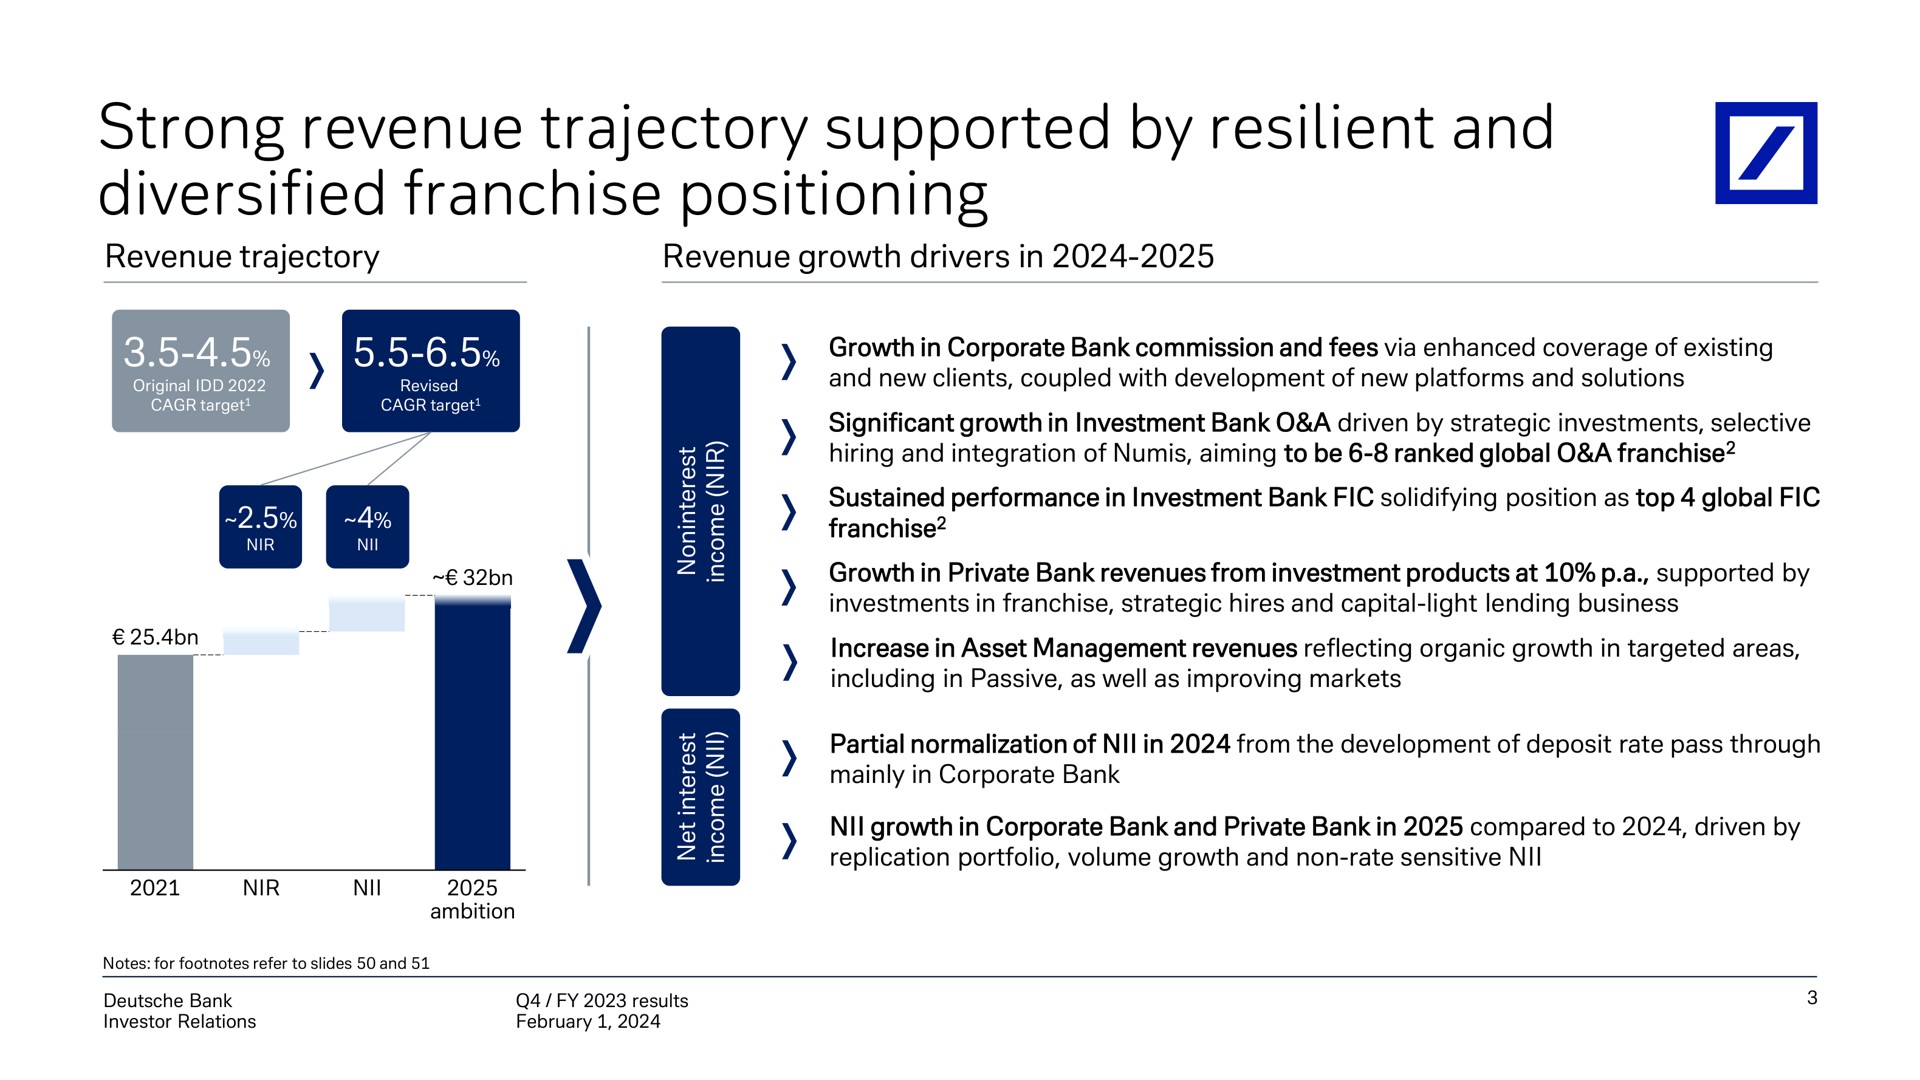 strong revenue trajectory supported by resilient and diversified franchise positioning sol roto | Deutsche Bank